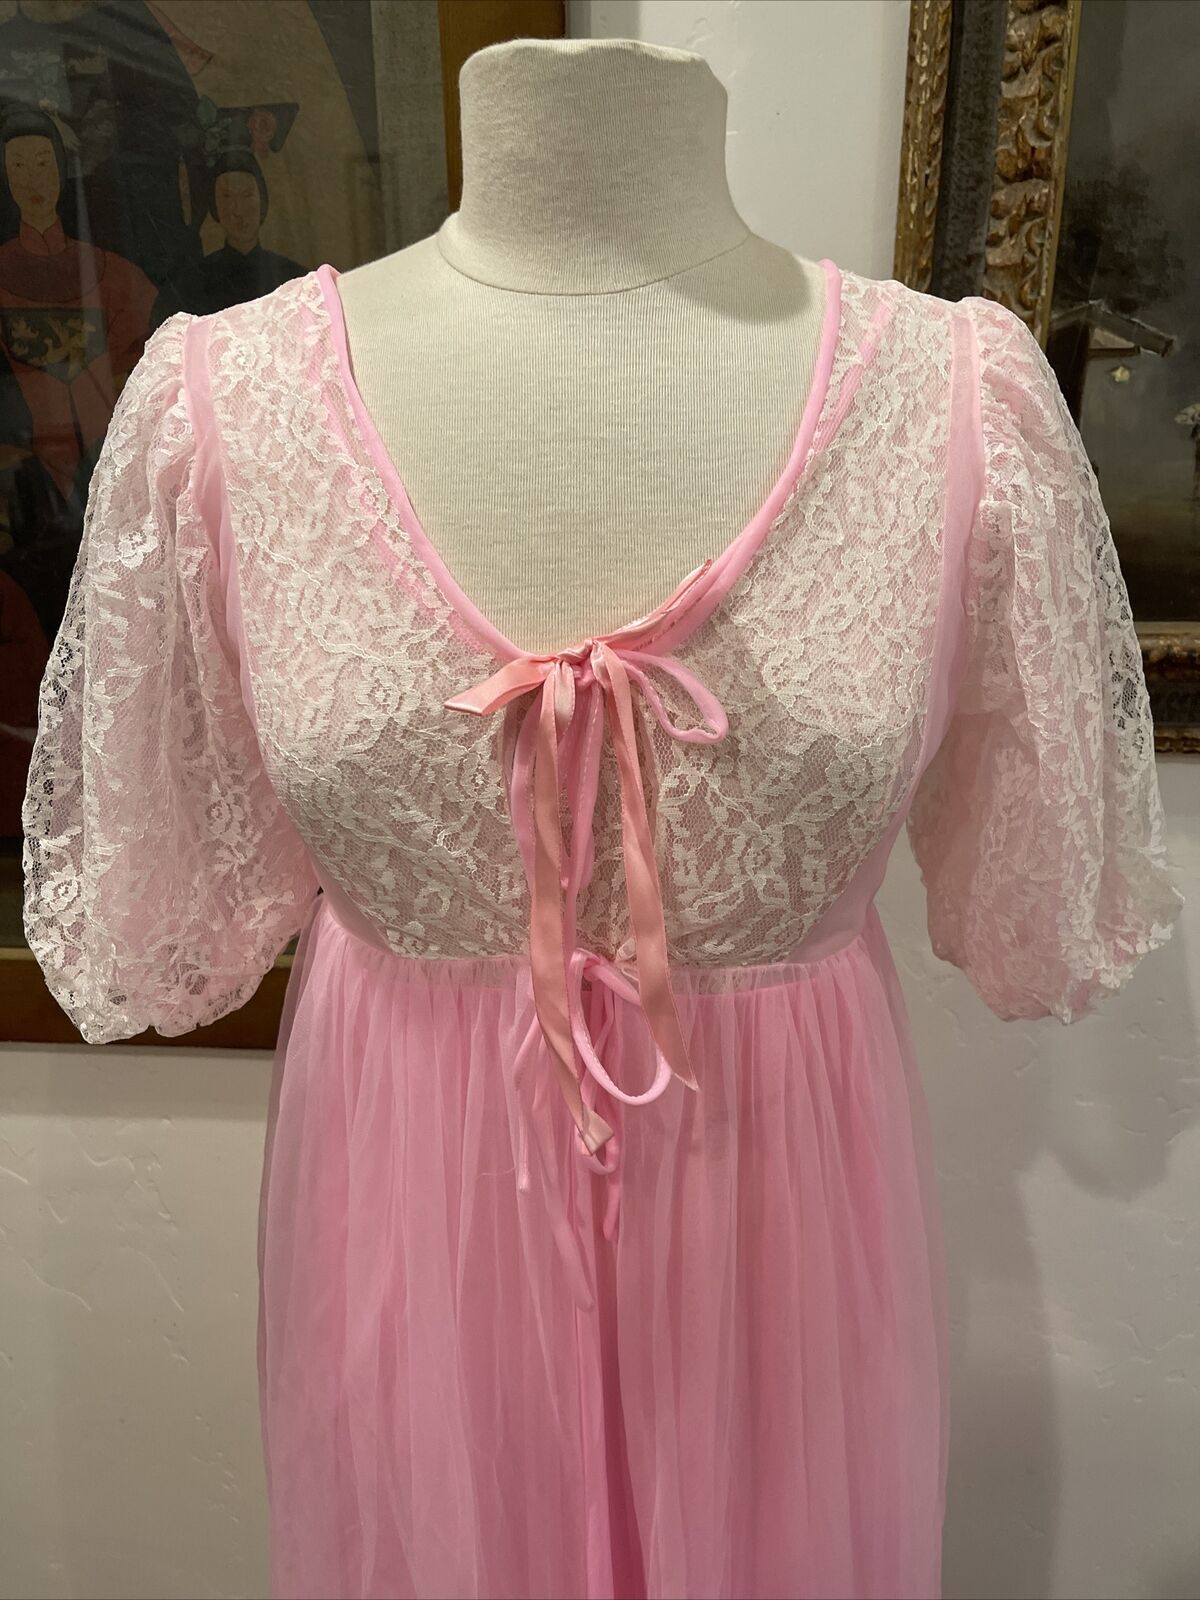 Vintage Cotton Candy Pink Peignoir nightie and ro… - image 4